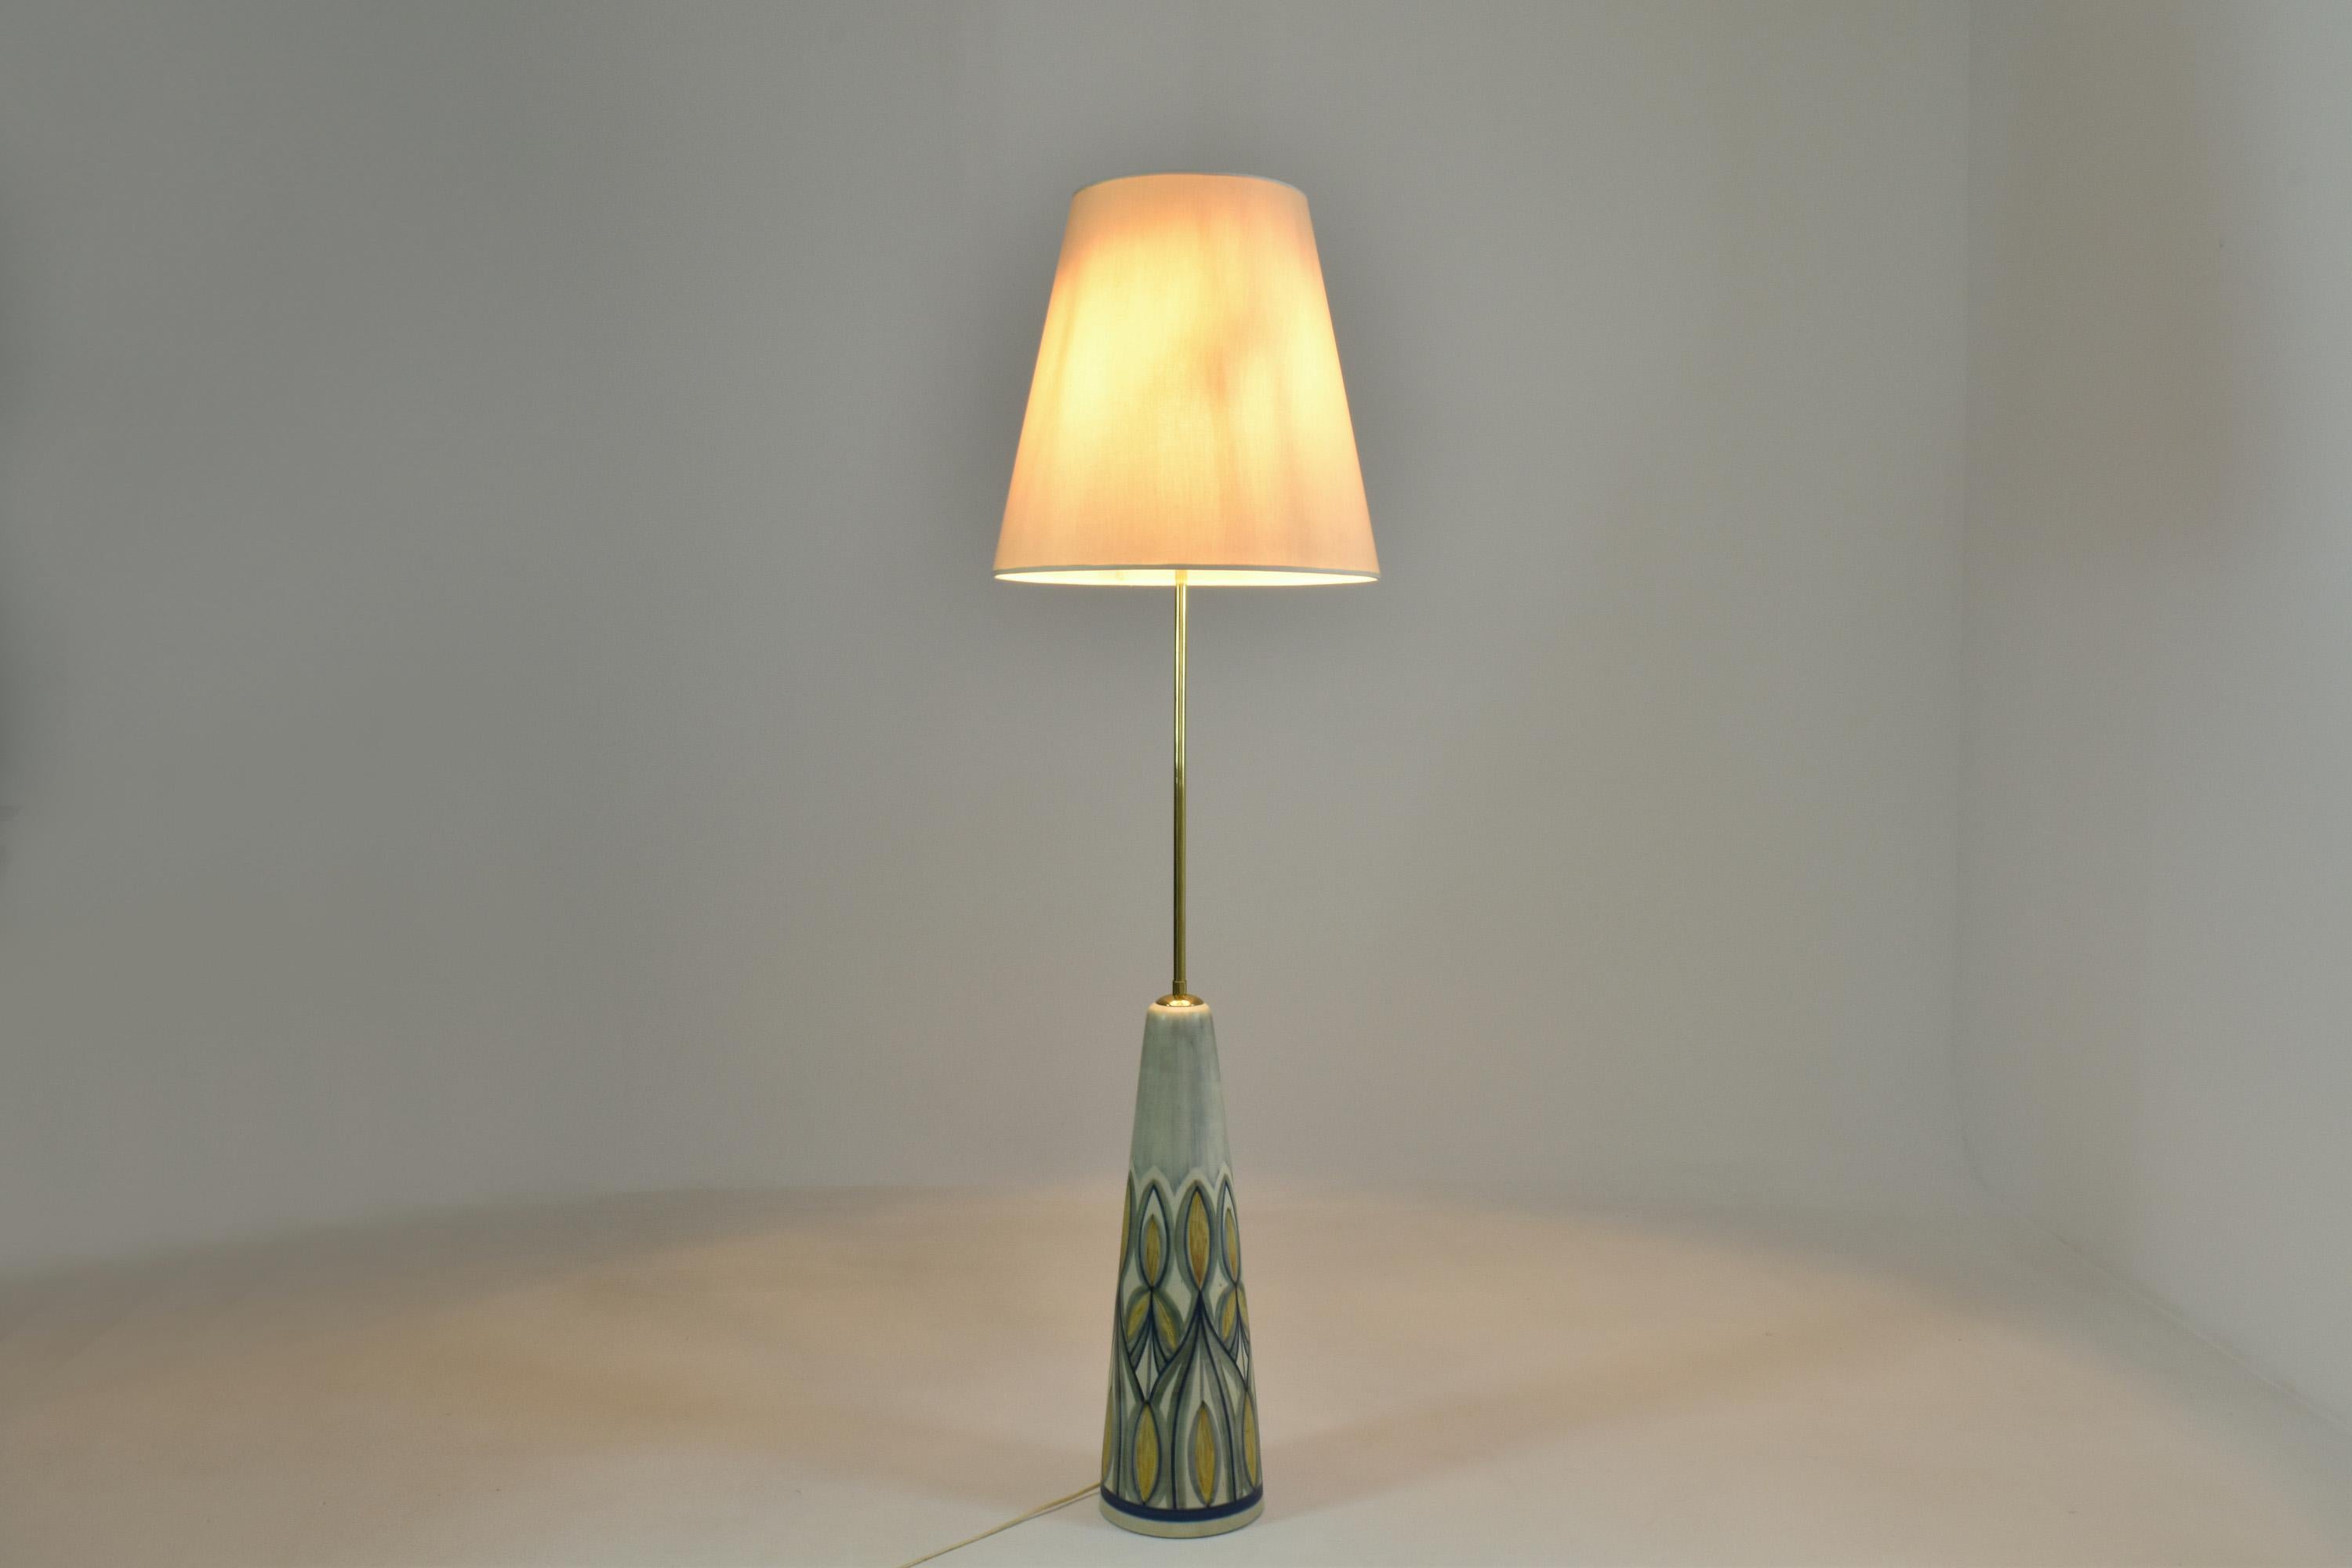 A very big and beautiful 20th-century vintage hand-painted ceramic floor lamp manufactured by the Danish company Søholm Stentøj in 1965. The conical base was painted by artist Rigmor Nielsen in blue, yellow, cream, and pastel tones. 
The stem is in